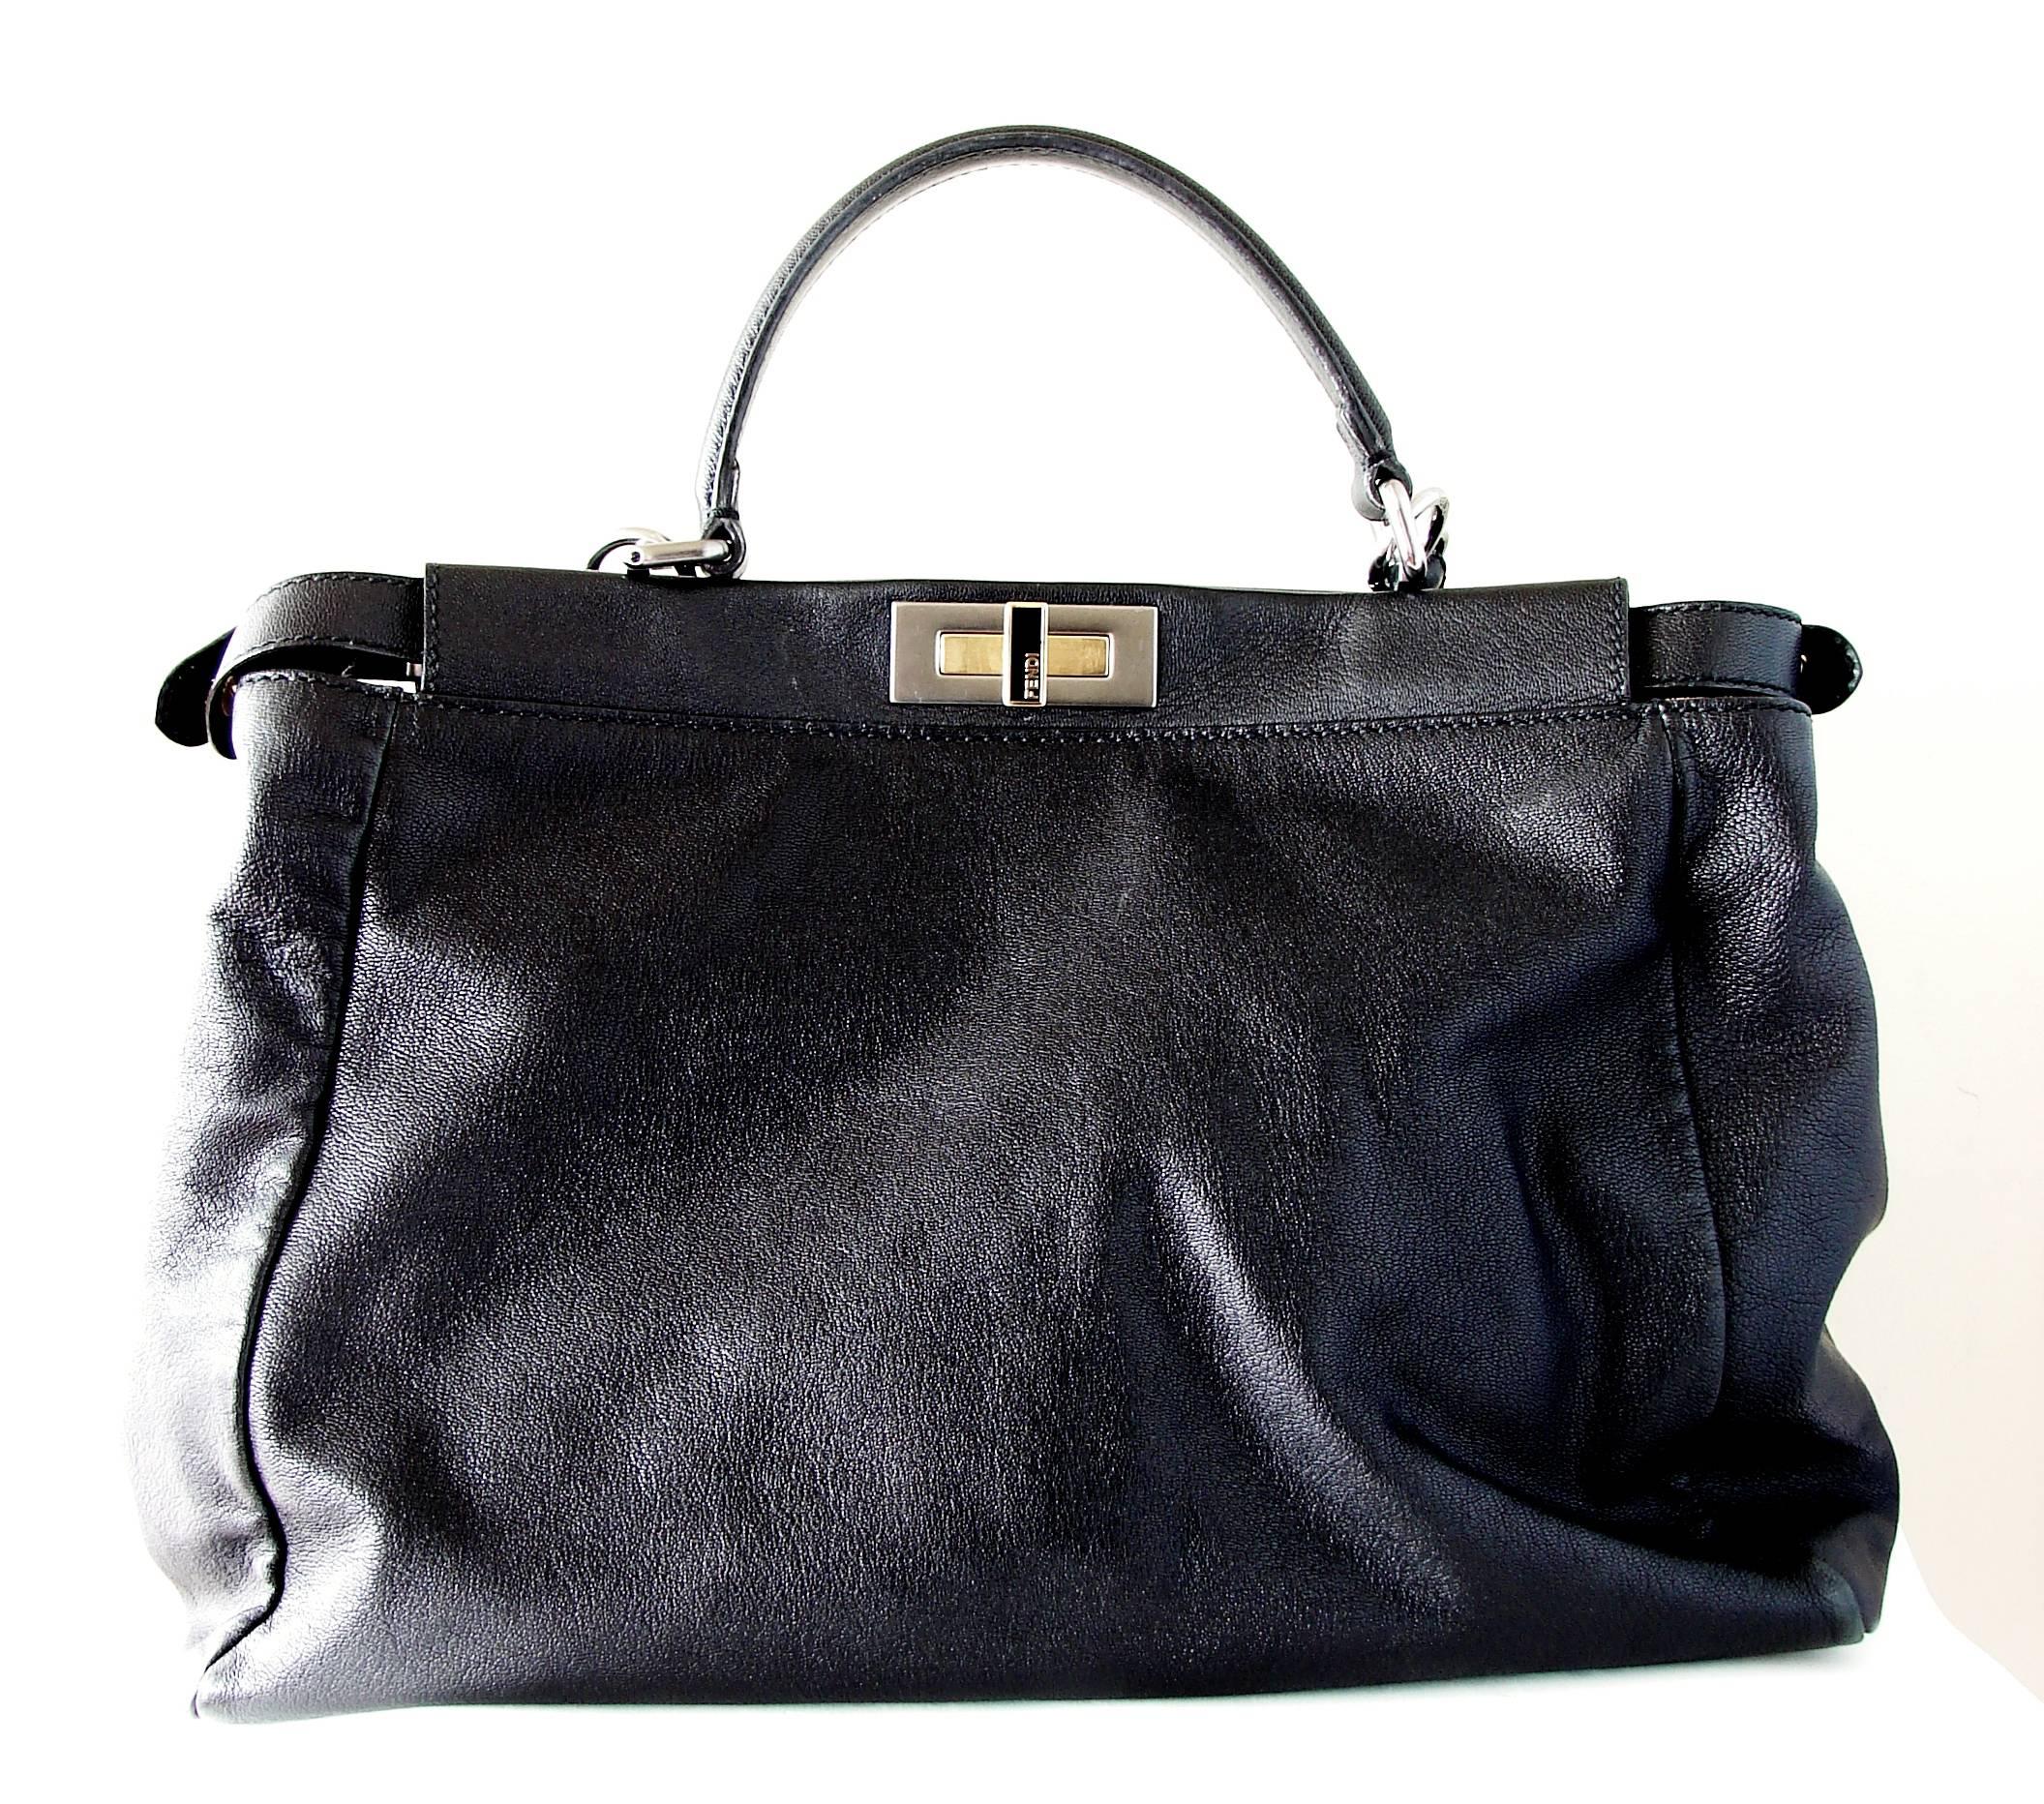 This incredible black leather handbag is from Fendi and features their stylish peekaboo design.  This substantial bag features two large sections, both lined in Fendi Zucca fabric, and features both gold and silver hardware throughout. It comes with